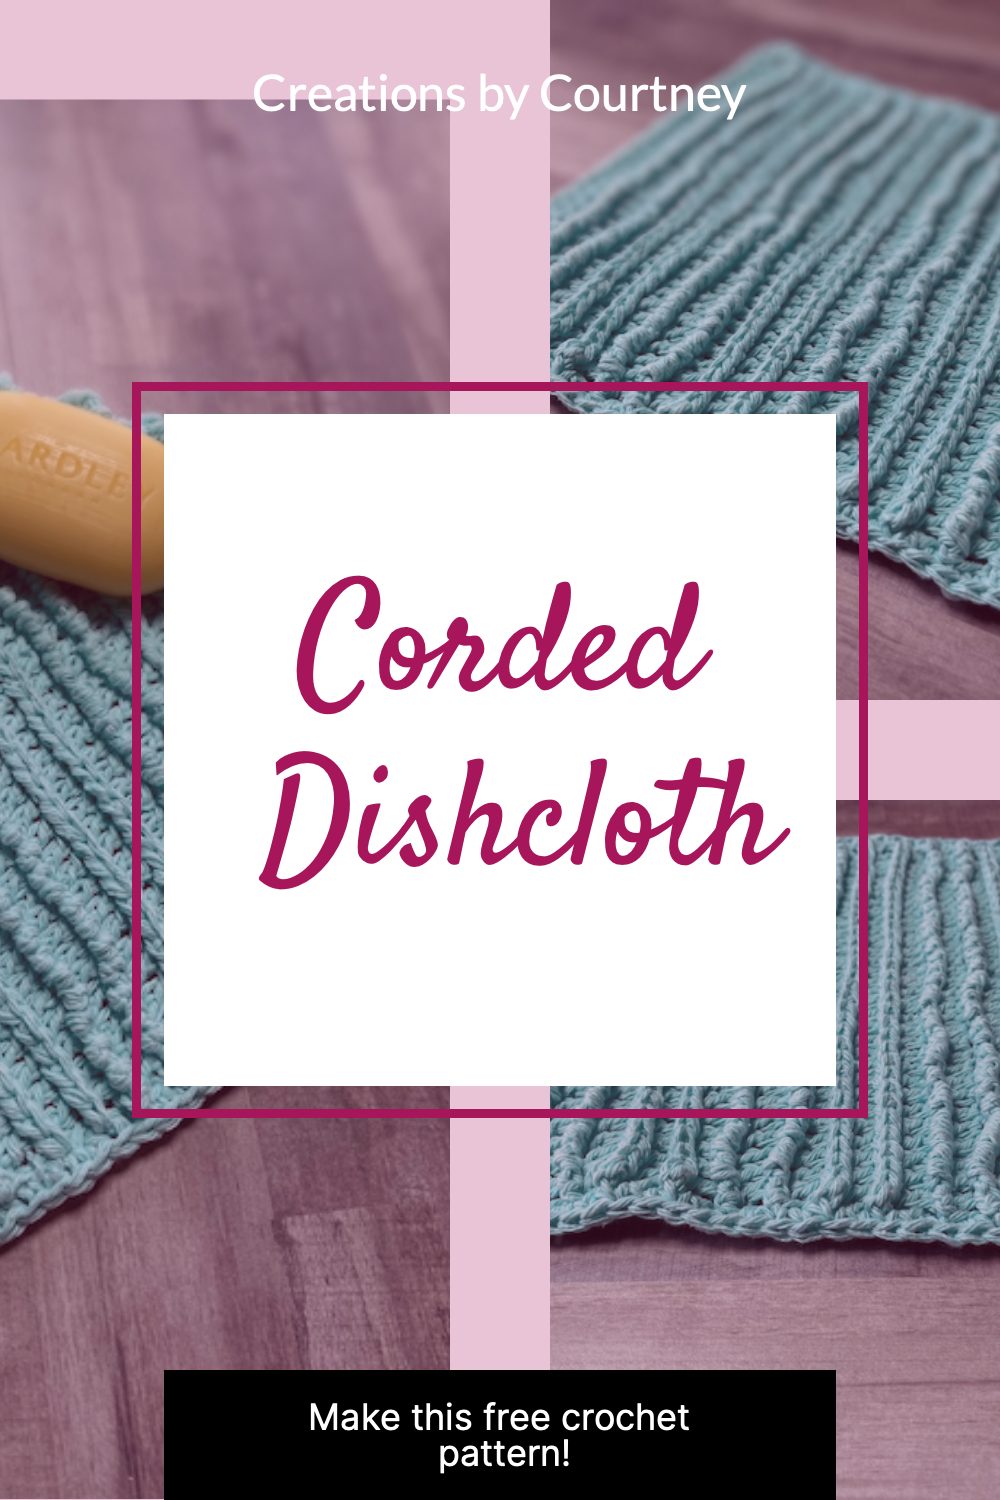 An image of a crochet dishcloth made with a cotton yarn. The dishcloth has lots of texture with surface stitches. 